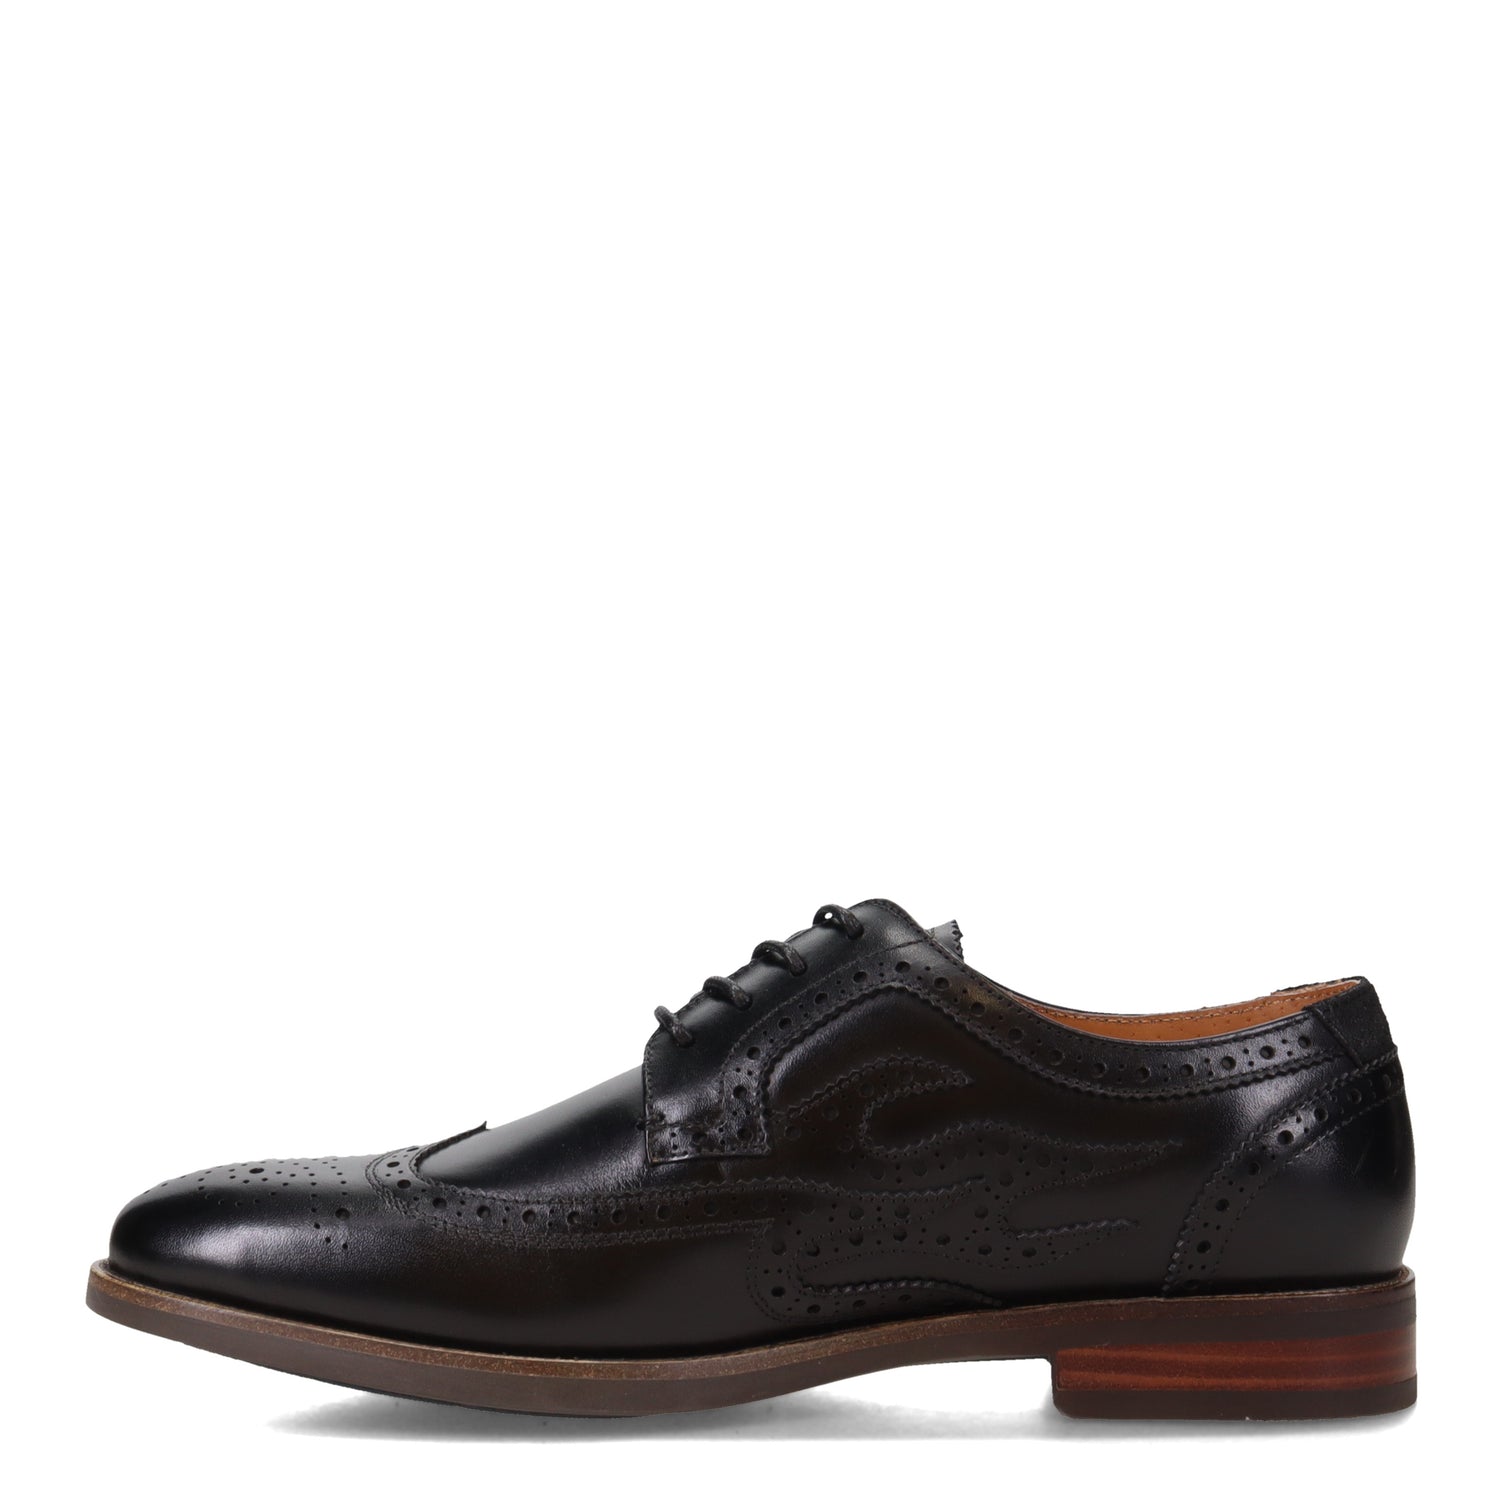 Florsheim Crossover Ltt Lace Up Casual Shoes - Mens